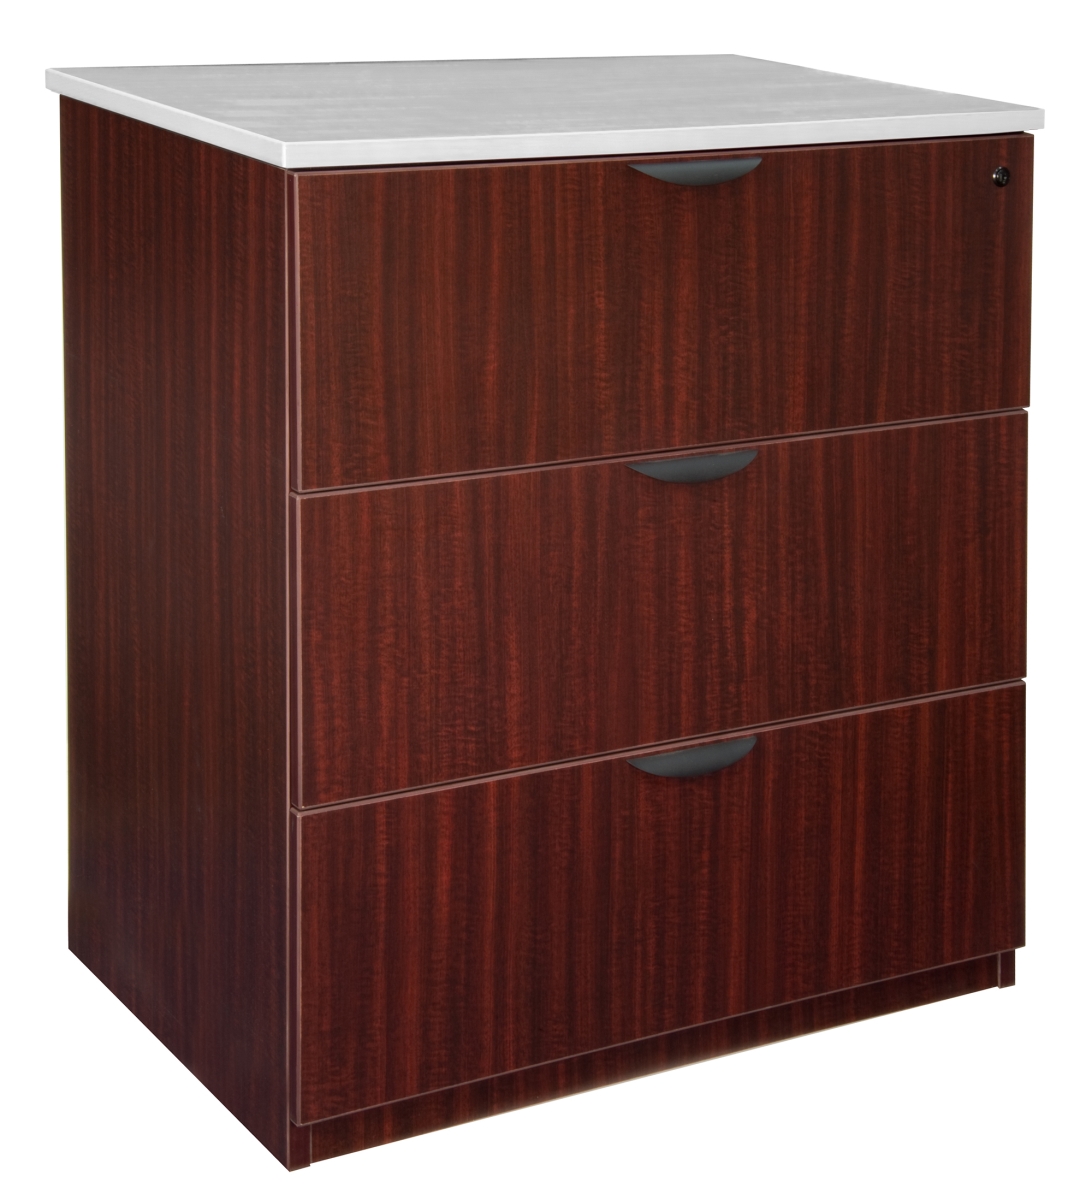 Lplf4136mh Legacy Stand Up Lateral File Without Top, Mahogany